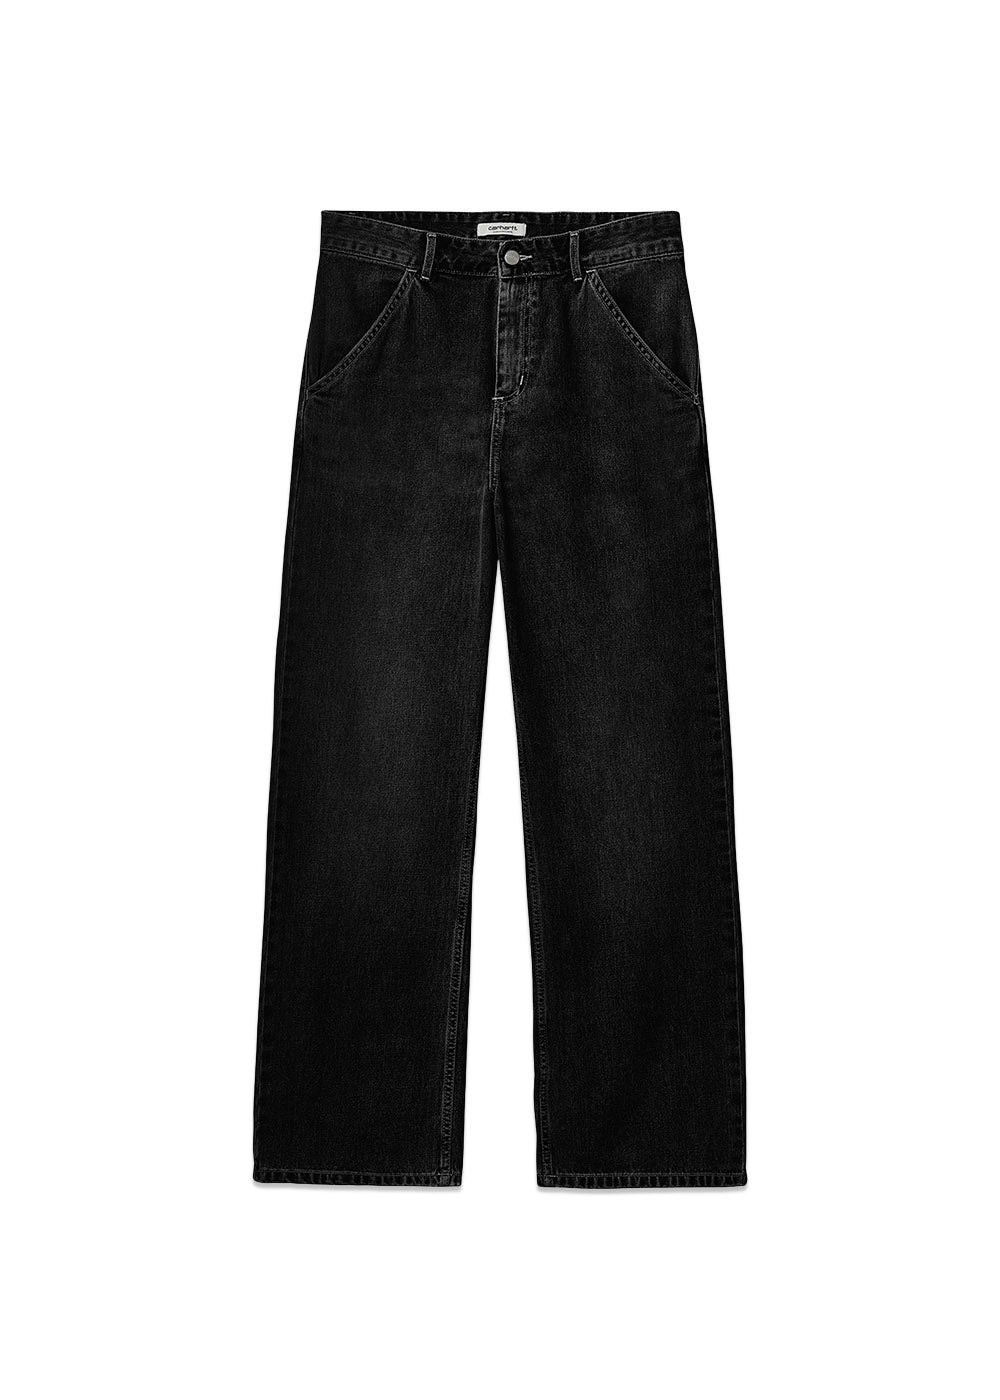 W Simple Pant - Black Stone Washed